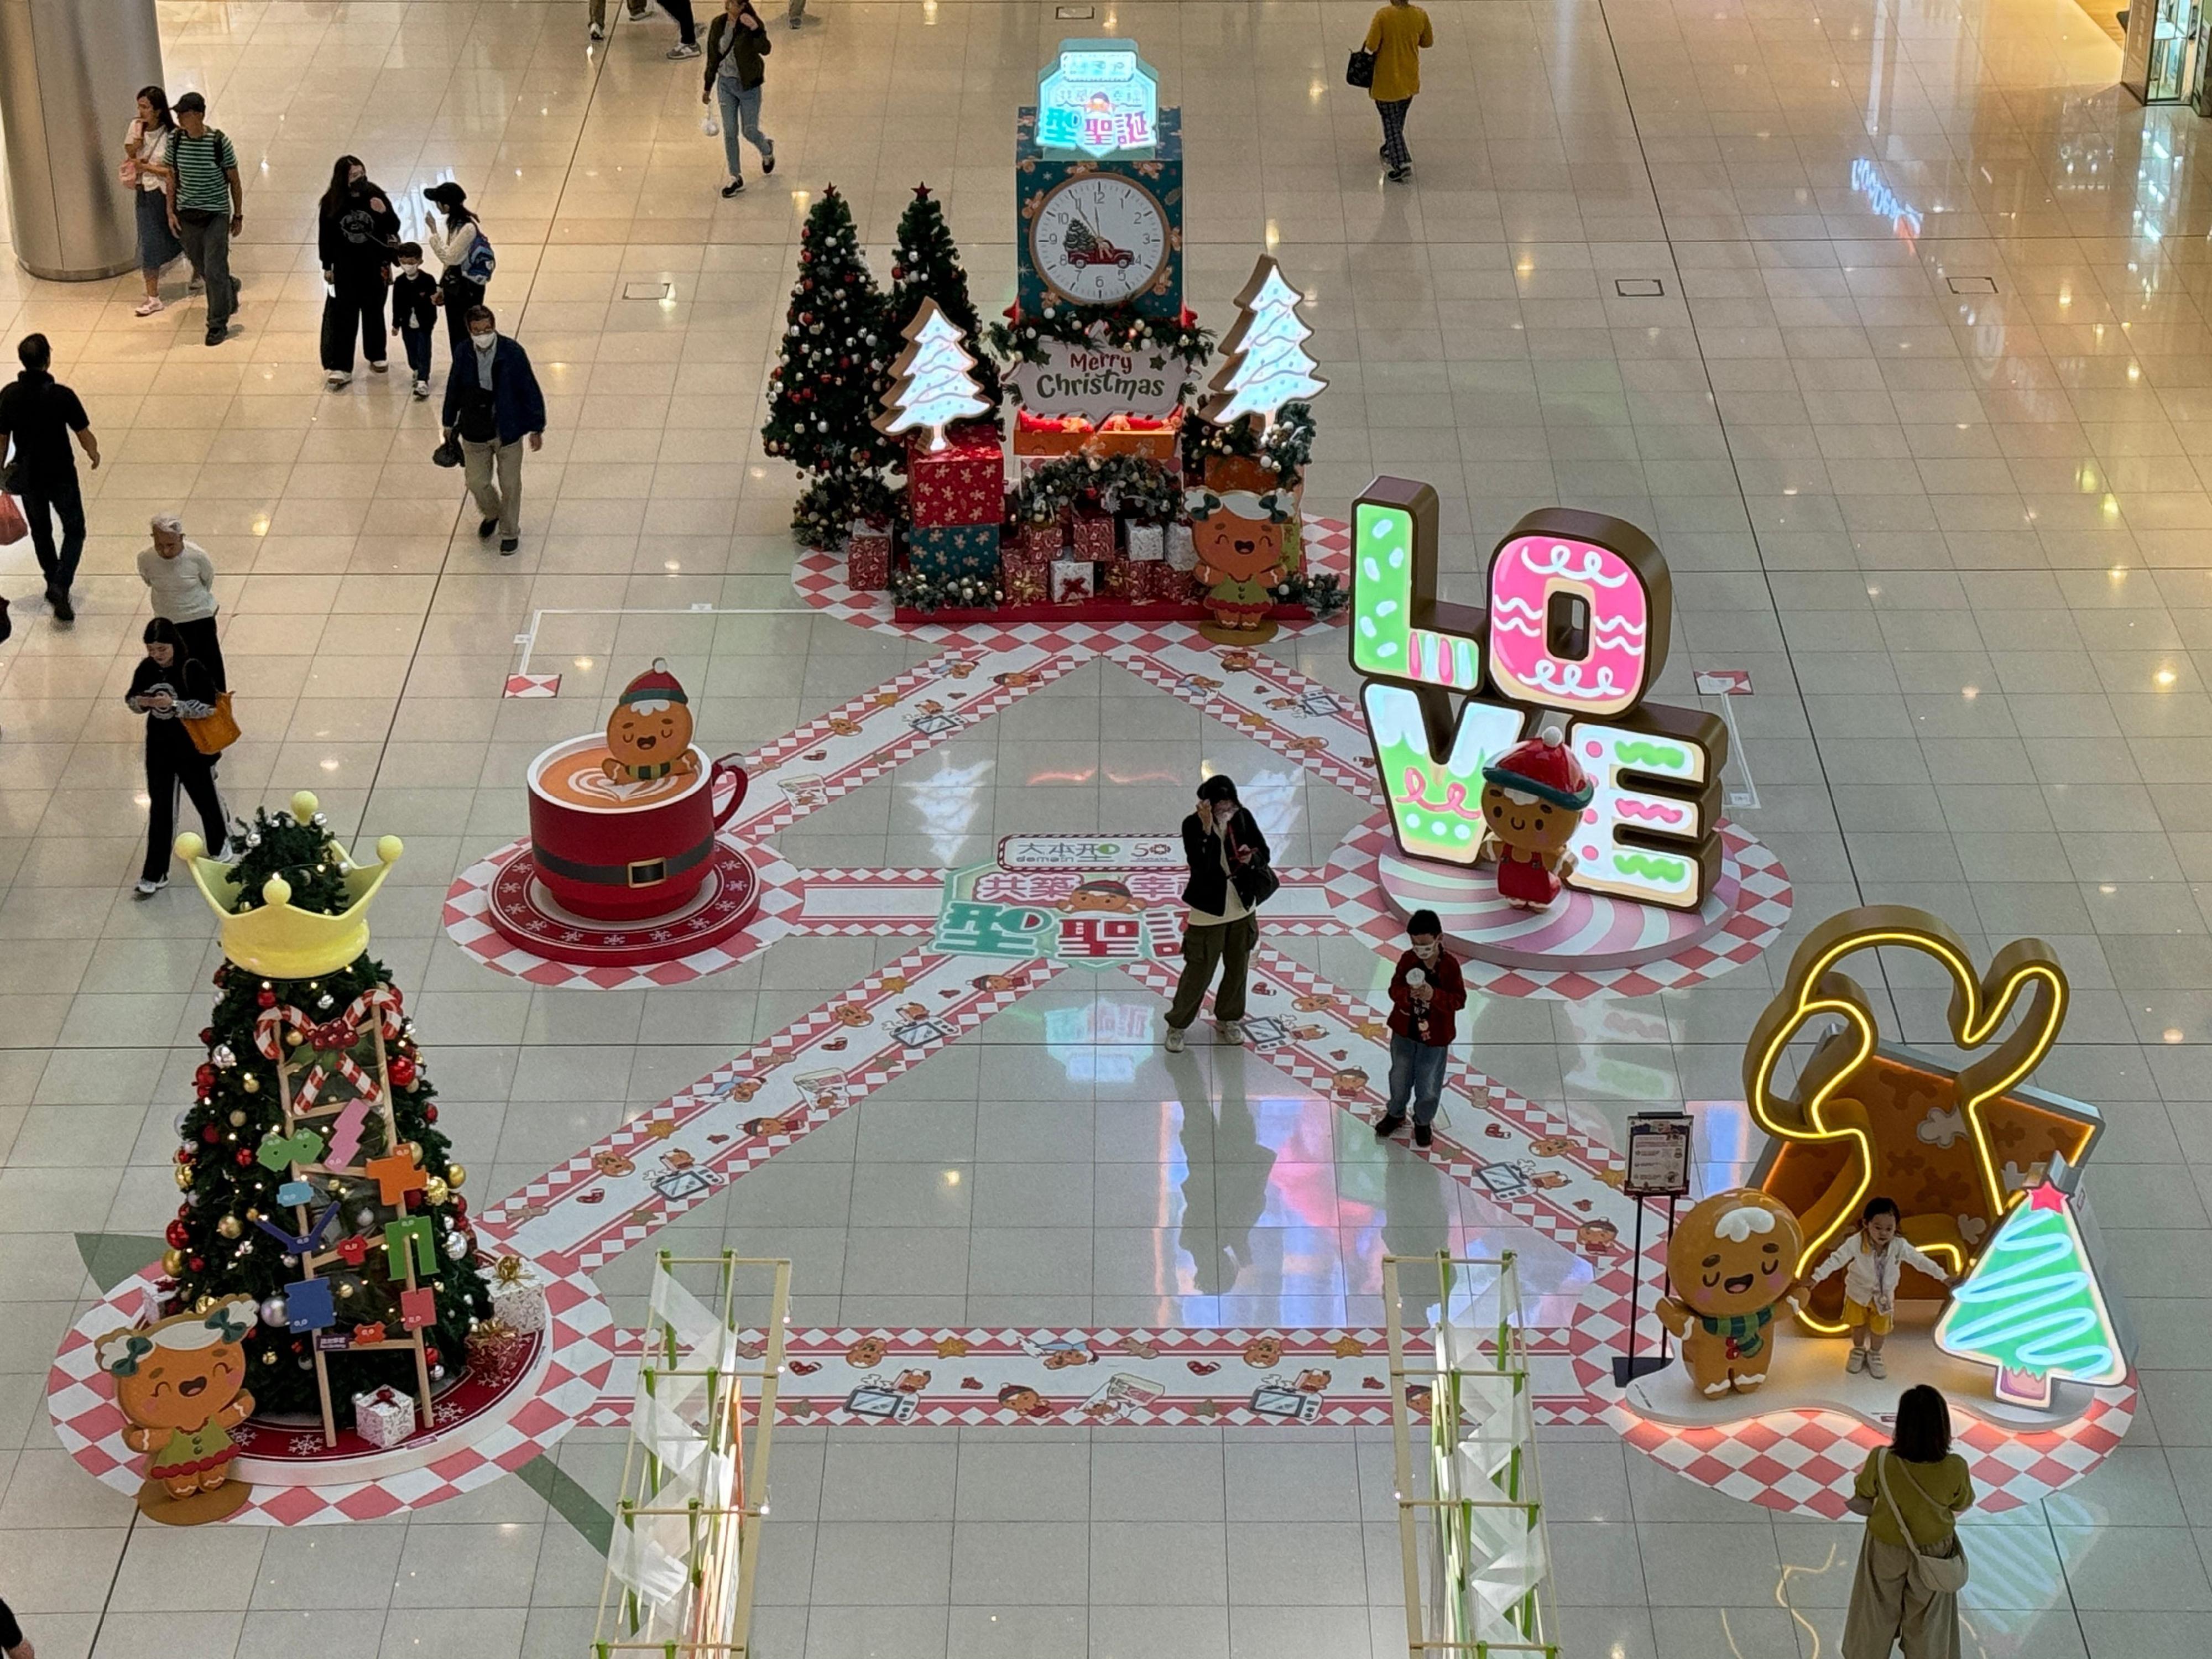 The Hong Kong Housing Authority (HA) is launching Christmas promotions and night vibe activities at its shopping centres to share the holiday season's joy with the public. Photo shows Christmas decorations with a gingerbread man family theme at the G/F atrium of the HA's regional shopping centre, Domain, in Yau Tong.